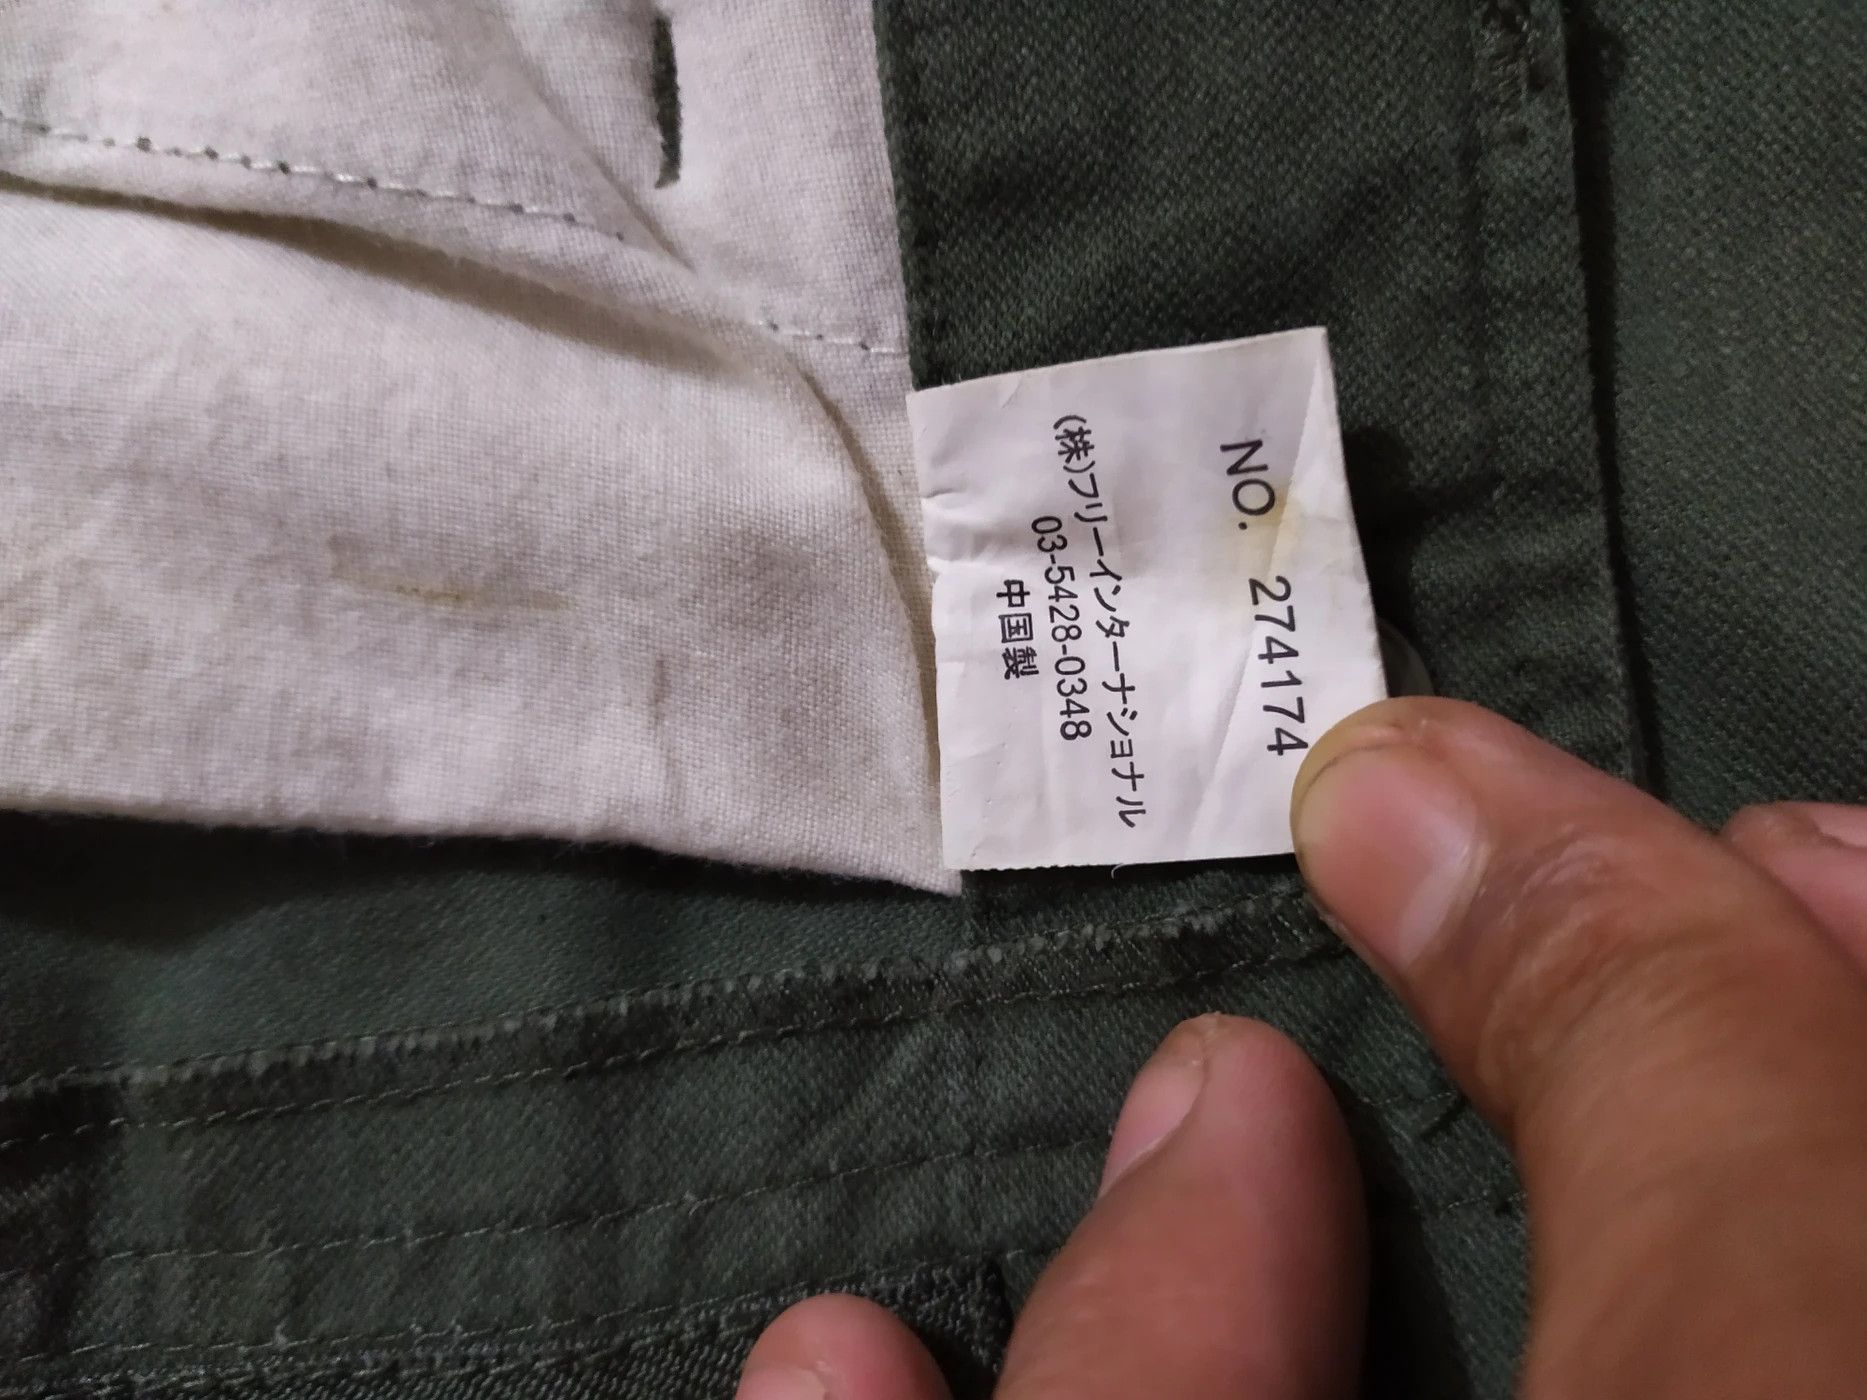 Japanese Brand Cargo Pants Size US 31 - 9 Preview